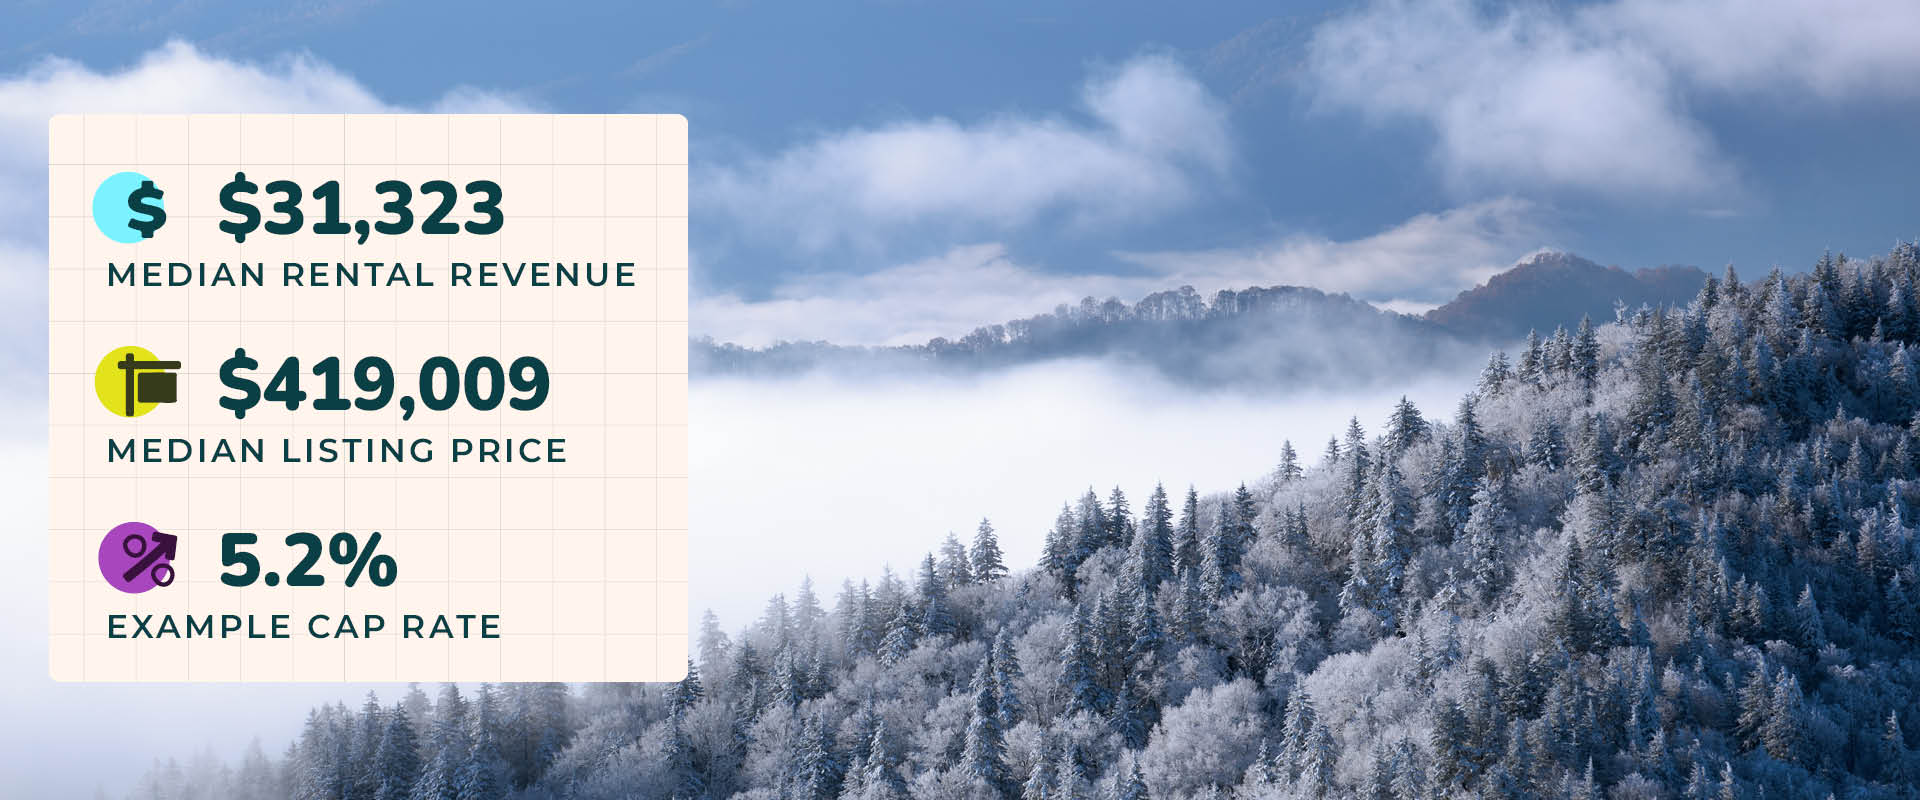 Photo of a winter scene with snow covered trees and thick fog near Maggie Valley, North Carolina. Image text reads, "$31,323 median rental revenue. $419,009 median listing price. 5.2% example cap rate."